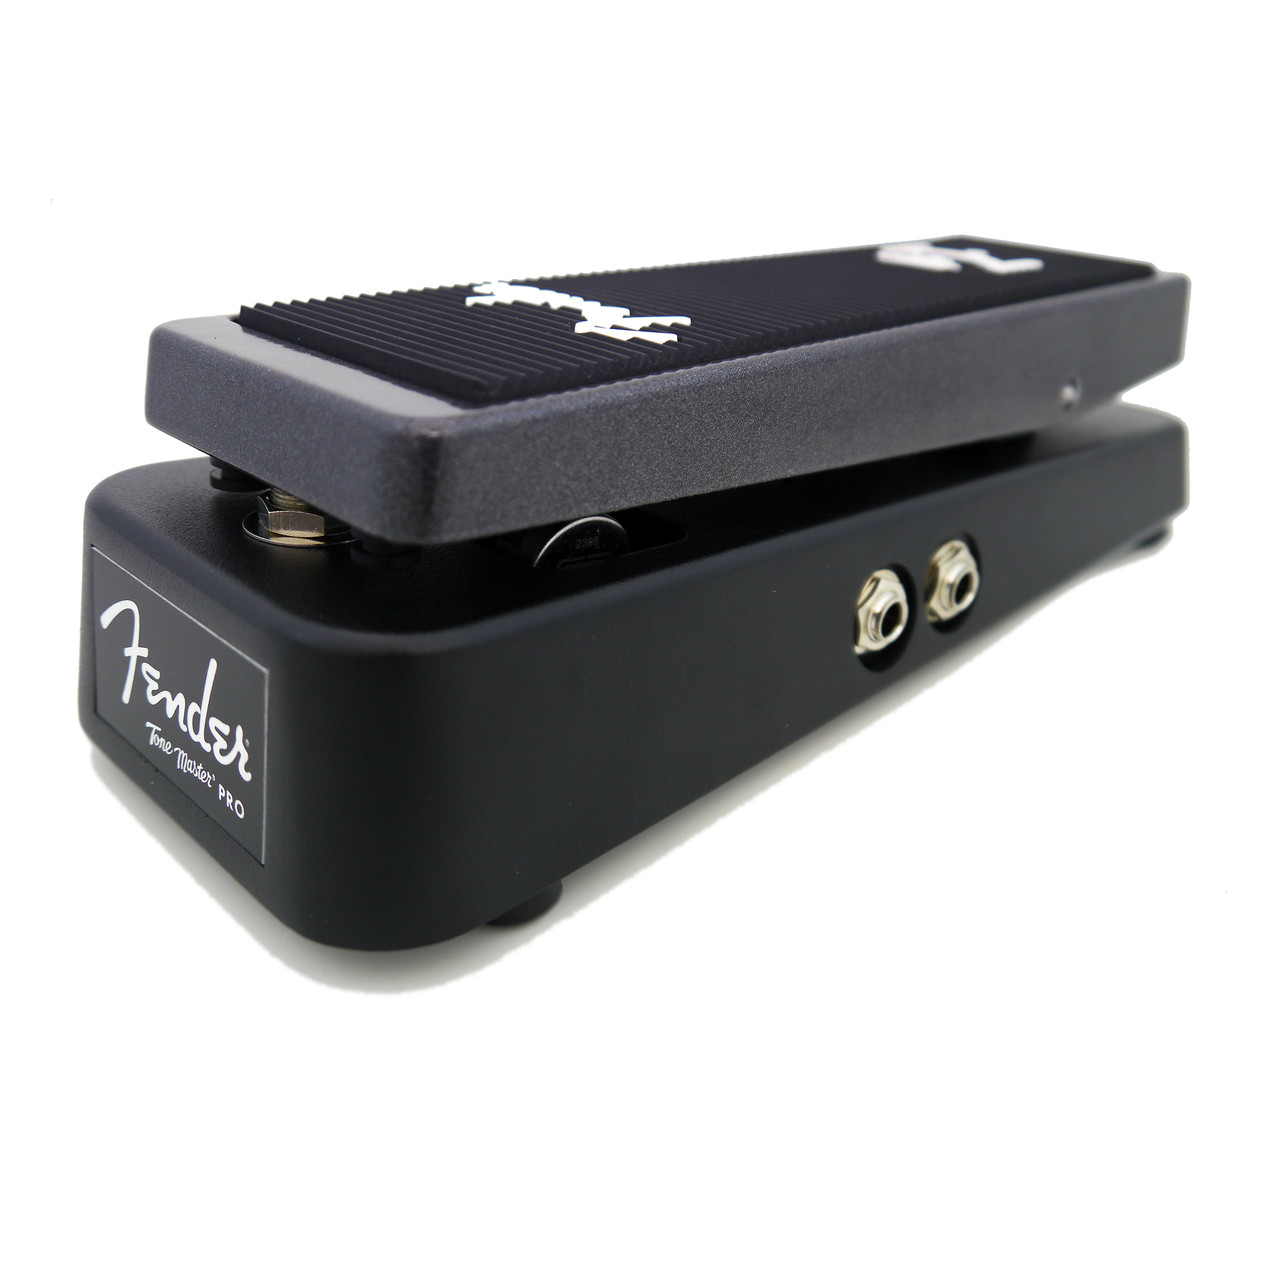 Mission Engineering SP1-TMP Expression Pedal for the Fender Tone Master Pro